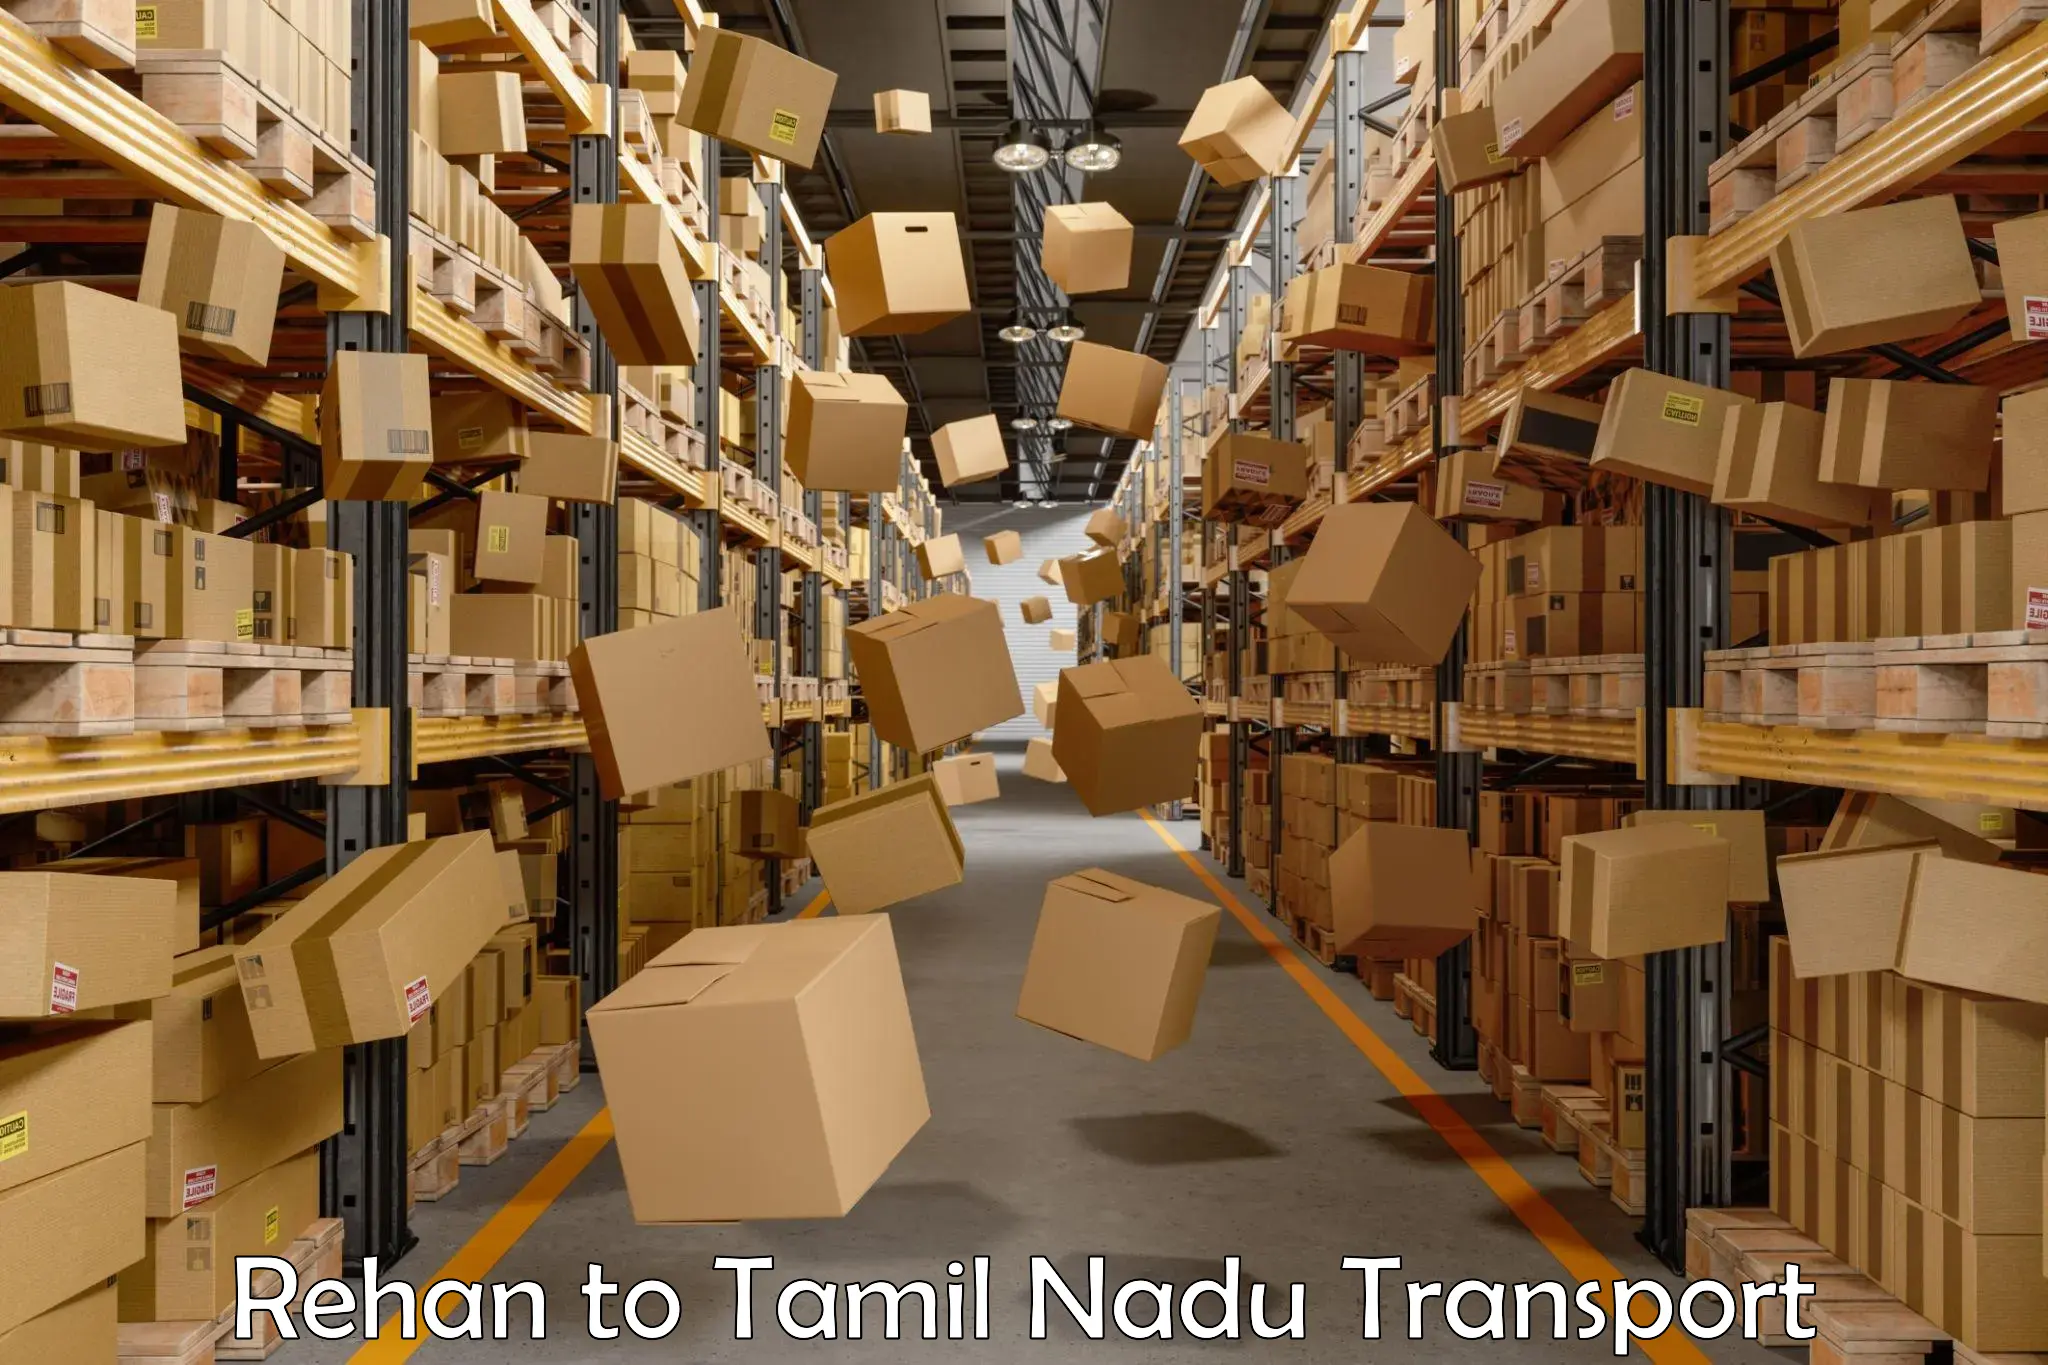 Furniture transport service Rehan to Vellore Institute of Technology